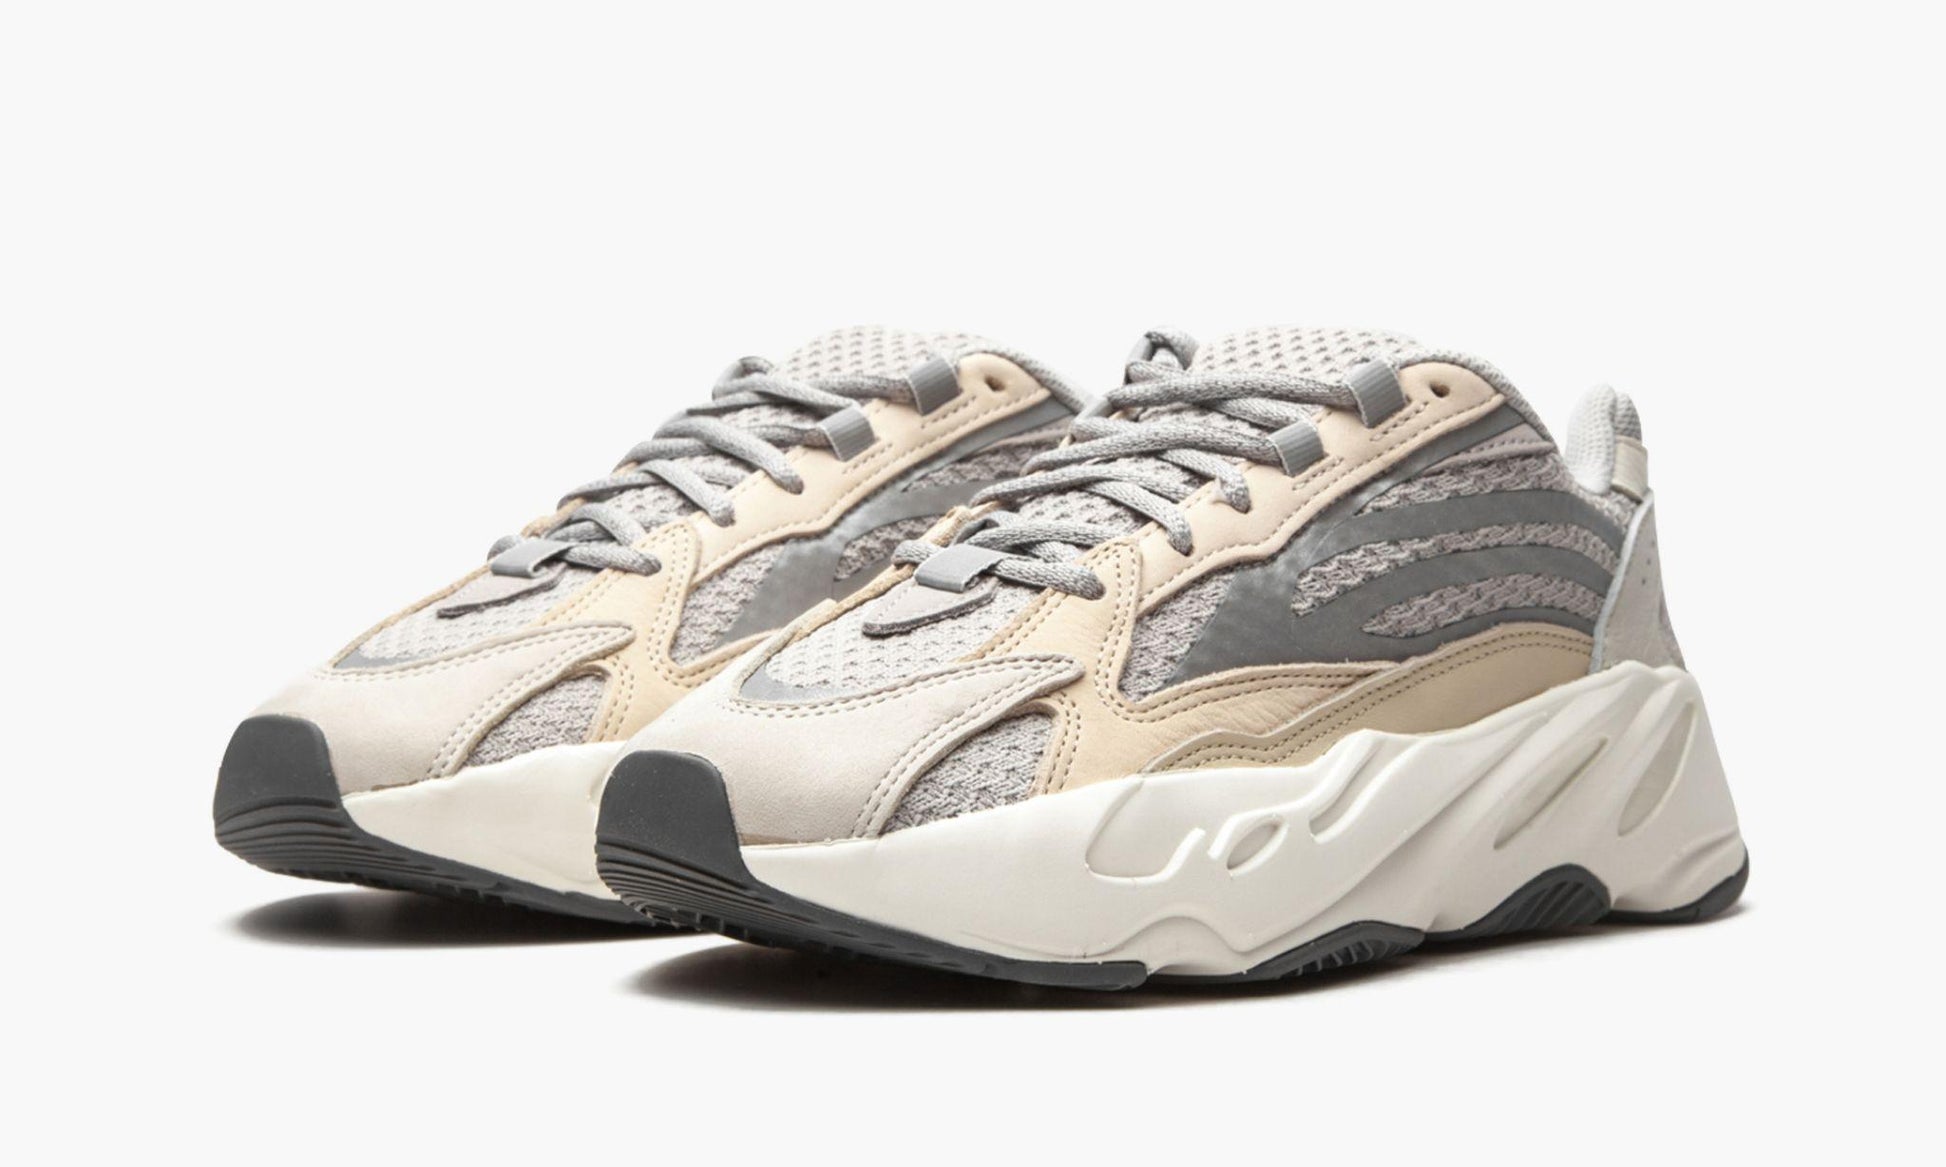 Adidas Yeezy Boost 700 V2 Men's Running Shoes - CADEAUME